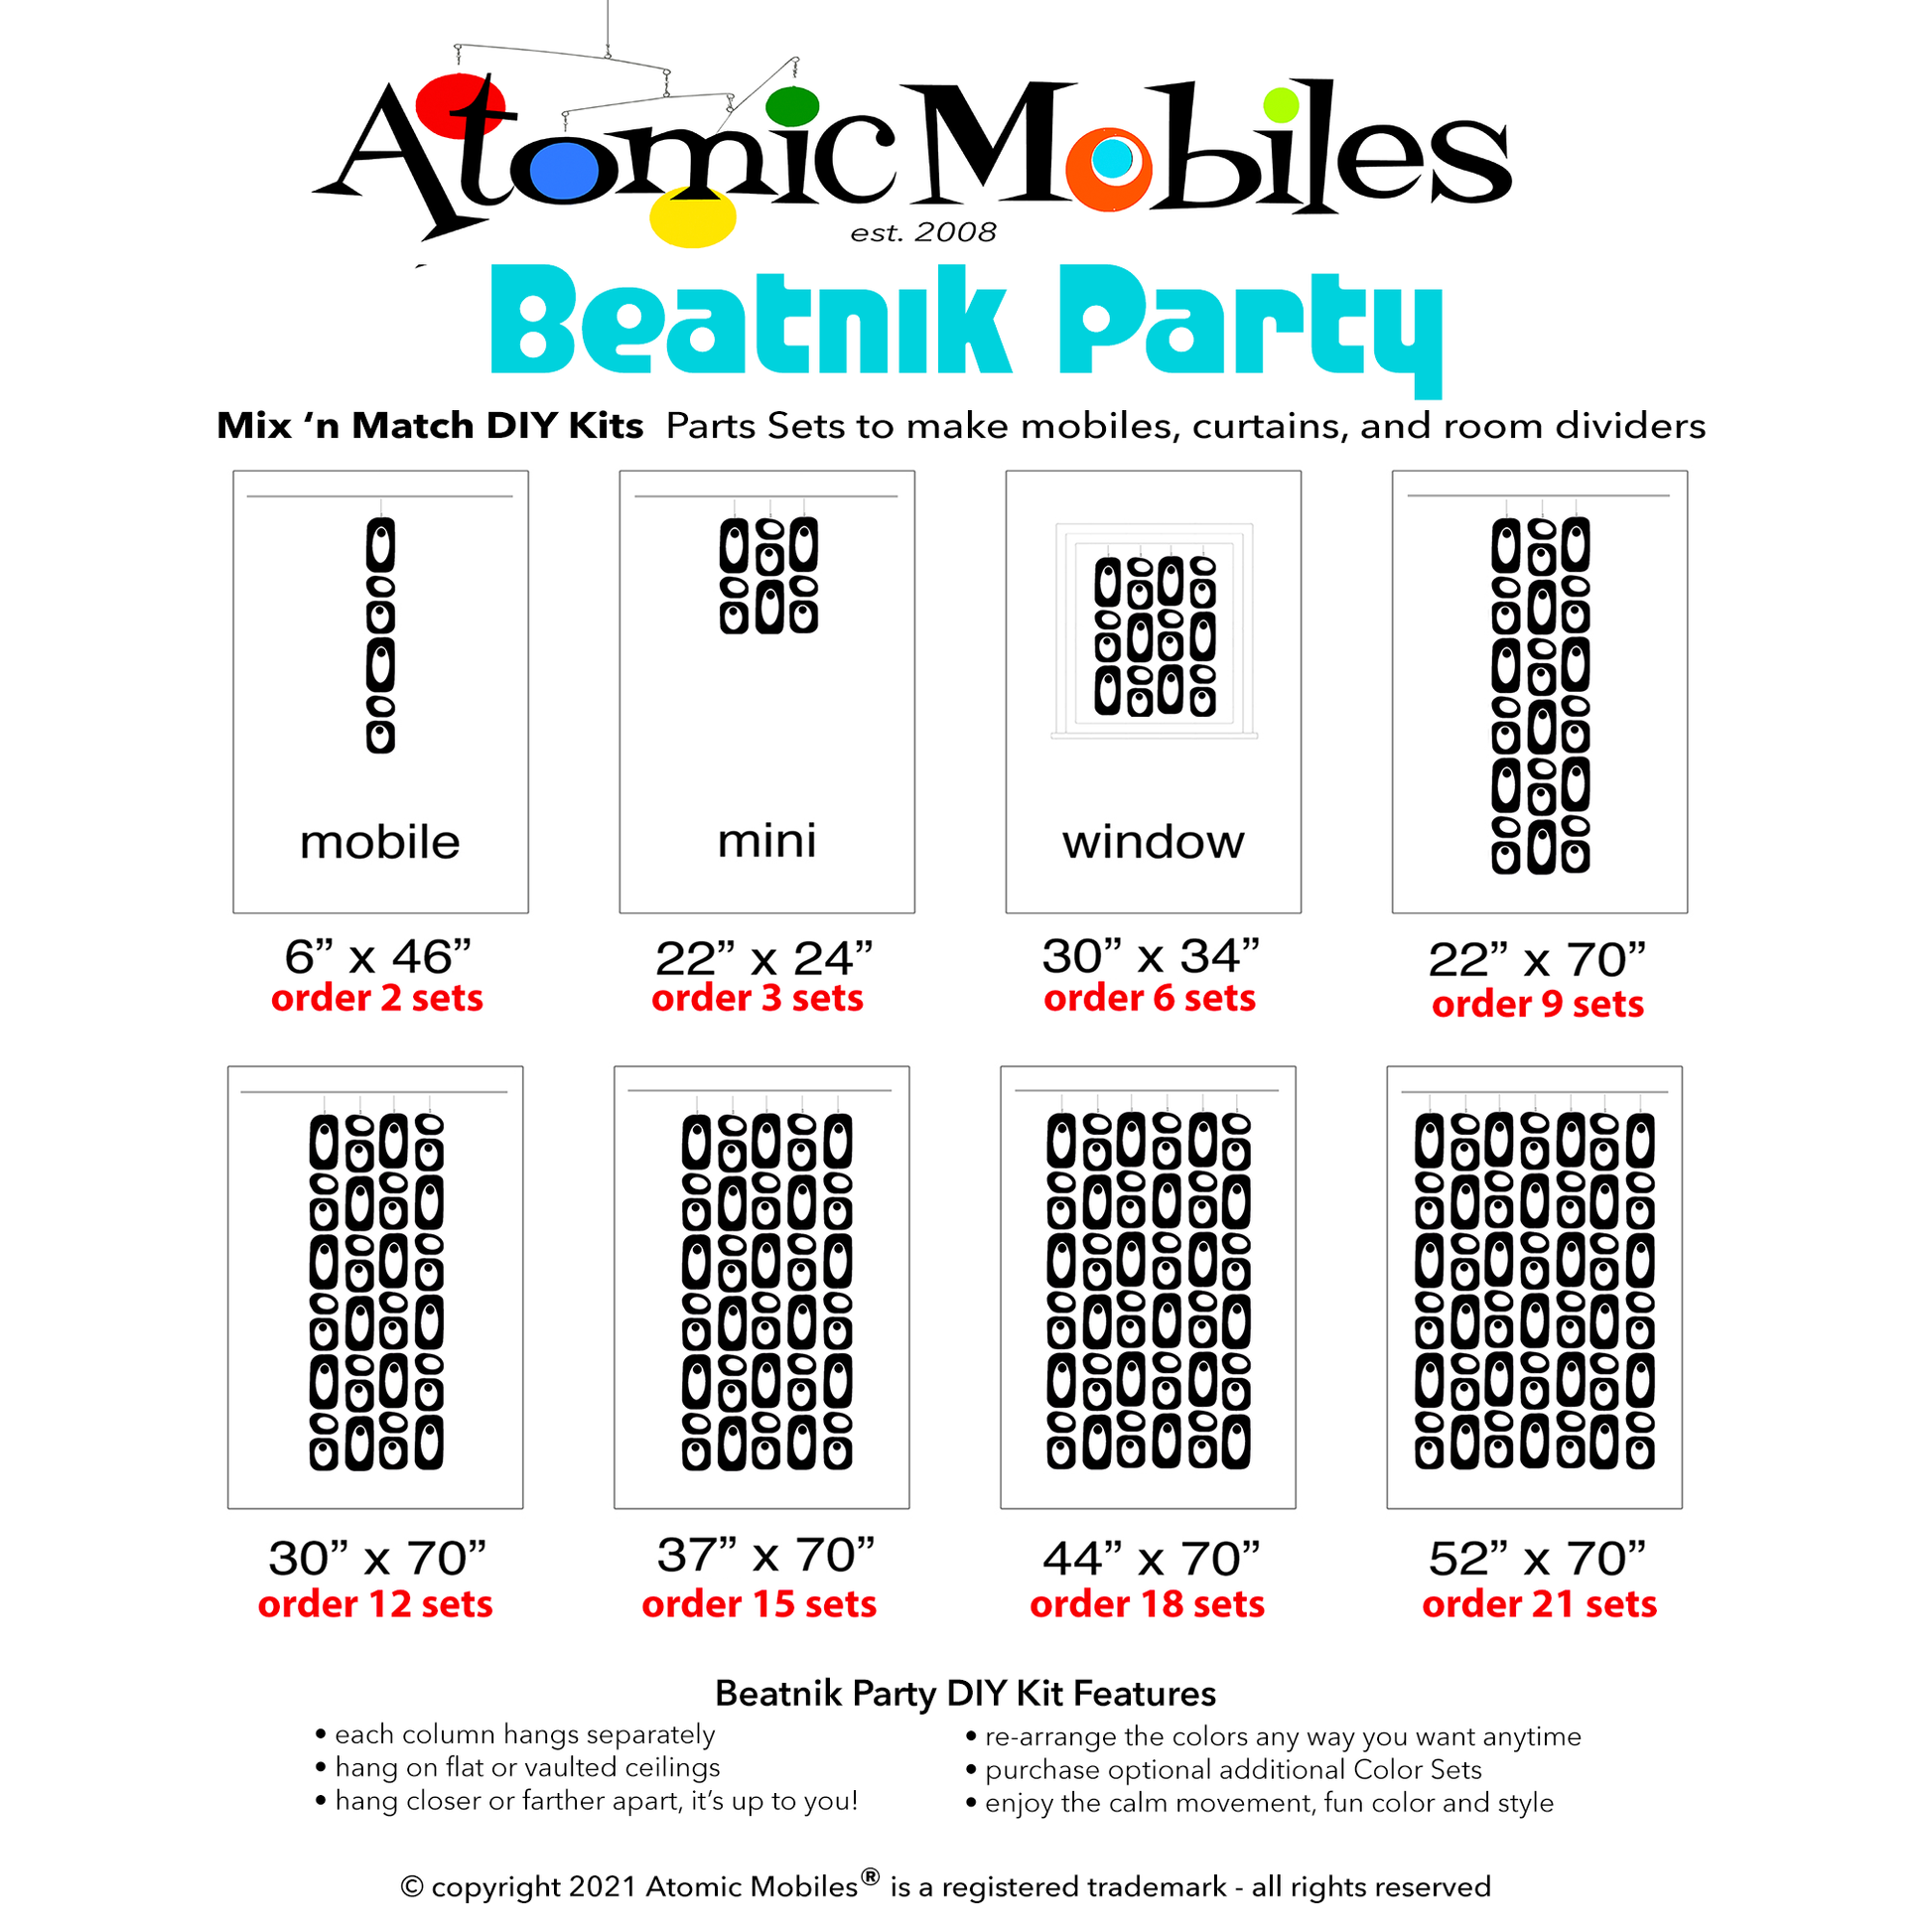 Size Chart for Beatnik Party Mix 'n Match DIY Kits - Parts Sets to make hanging art mobiles, curtains, and room dividers by AtomicMobiles.com